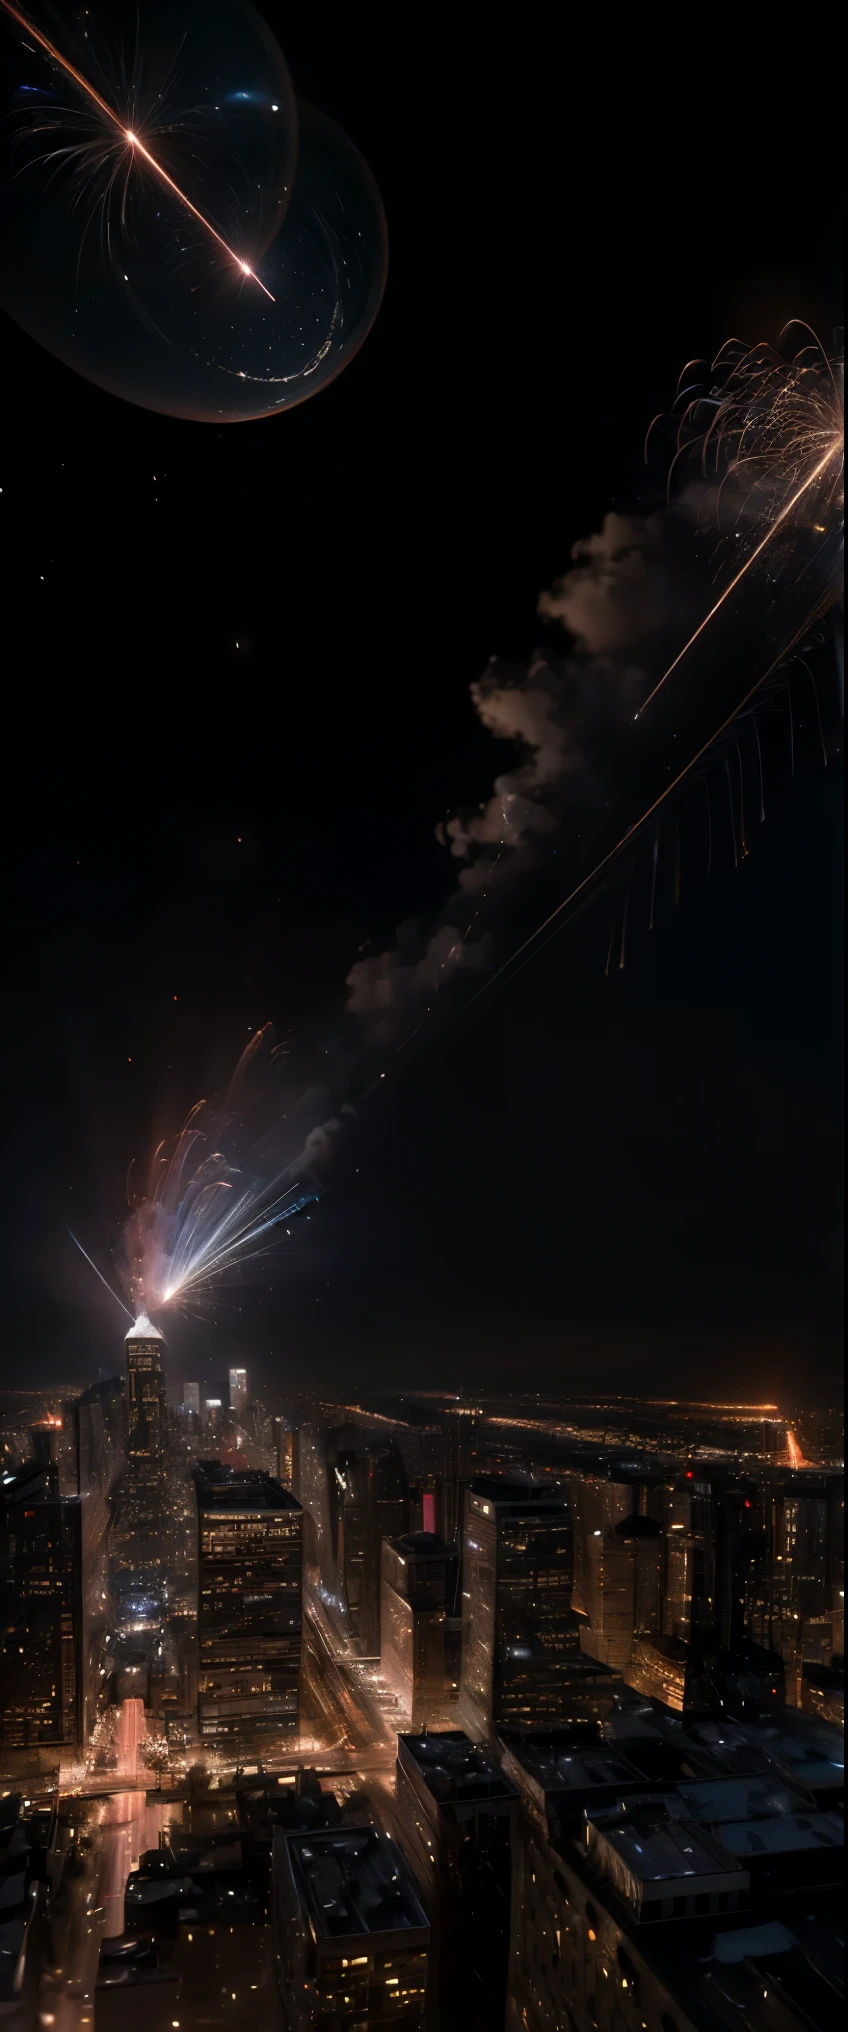 ((masterpiece, highest quality, Highest image quality, High resolution, photorealistic, Raw photo, 8K)), Meteorites rain down on the city from the night sky,